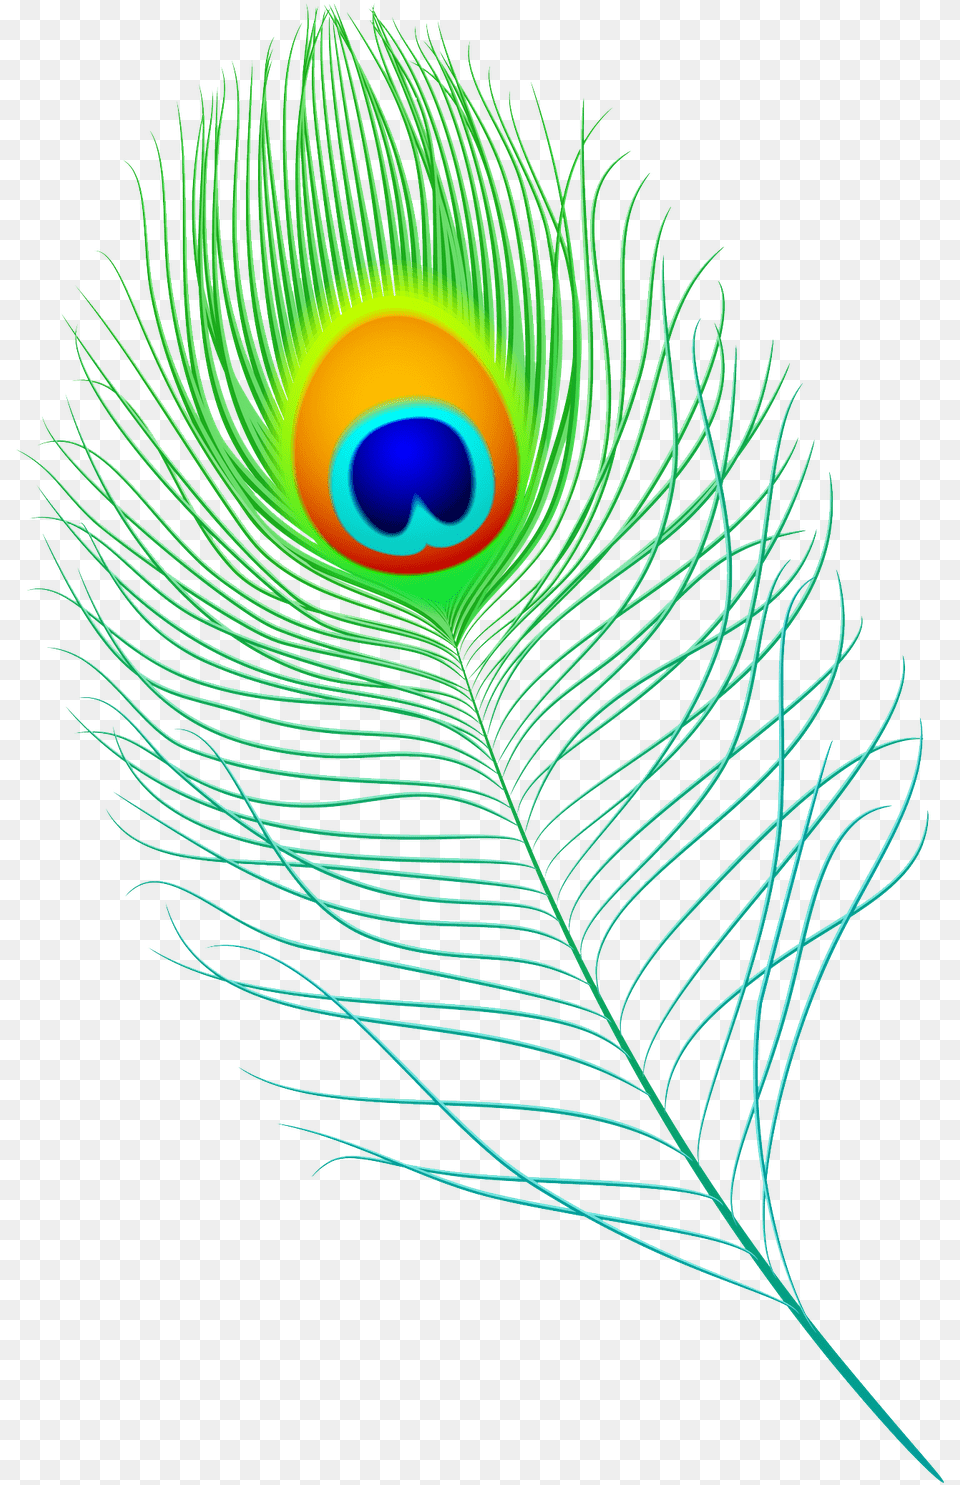 Peacock Feather Vector Peacock Feather Pen Vector, Plant, Pattern, Animal, Accessories Png Image